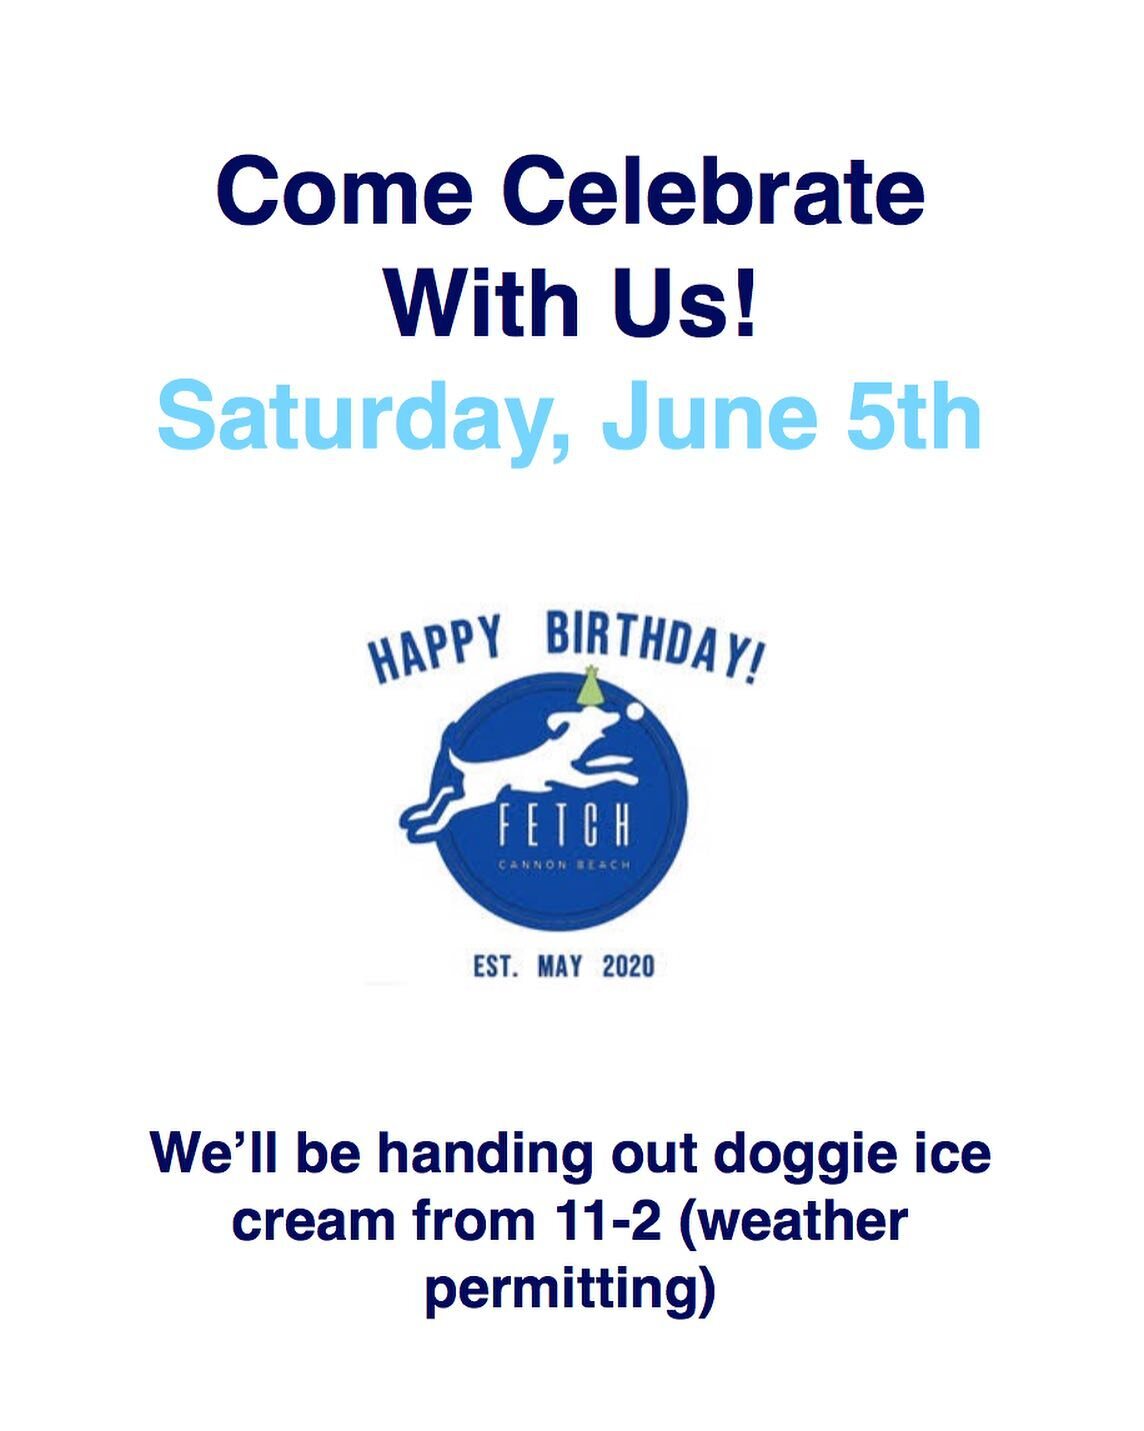 We can&rsquo;t believe it&rsquo;s already been a YEAR since we opened! We want to have a Covid-friendly celebration, so we&rsquo;ll be handing out doggie ice cream and some other treats as well! We&rsquo;re so excited to see you all!!